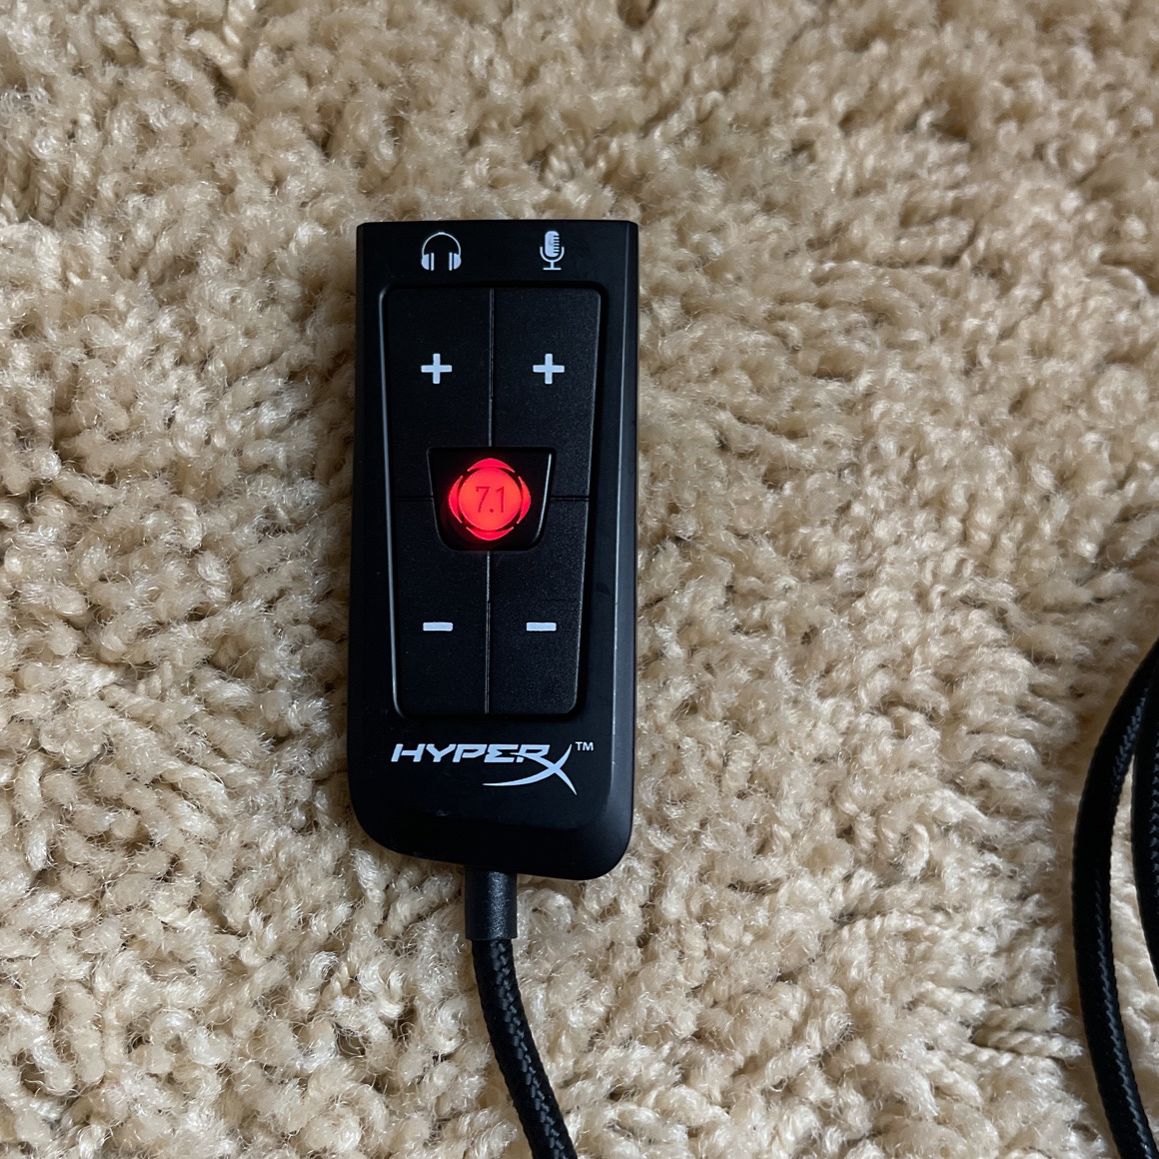 External Card Gaming Hyperx Amp Usb Virtual 7.1 Surround for Sale in Stockton, CA OfferUp